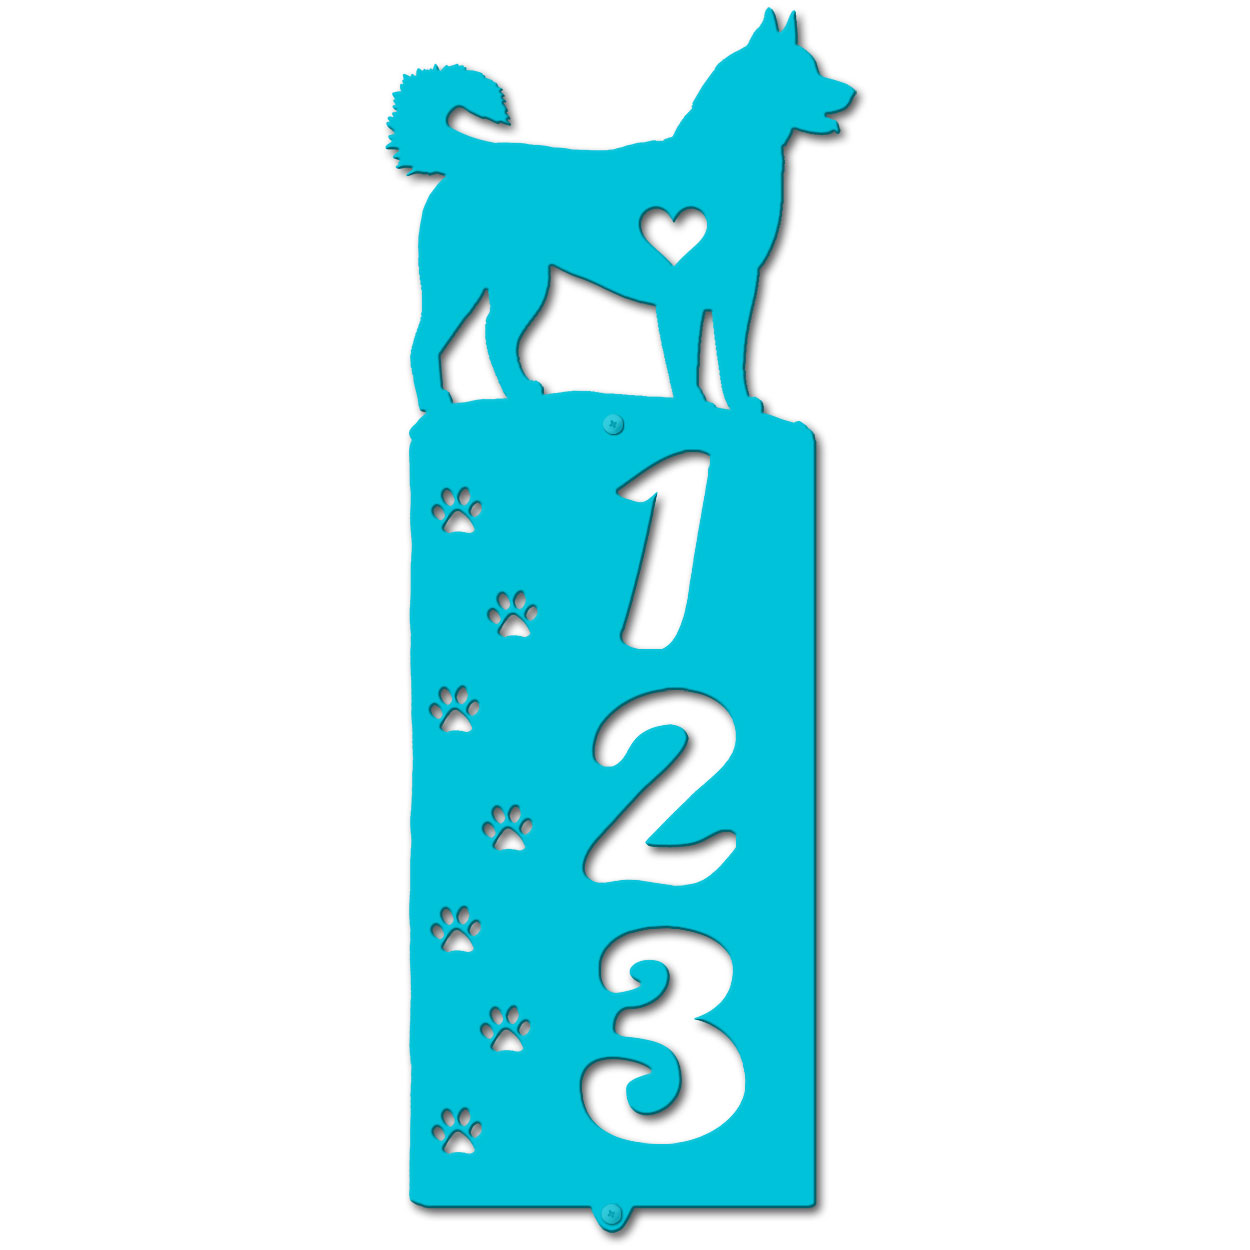 636243 - Husky Cut Outs Three Digit Address Number Plaque